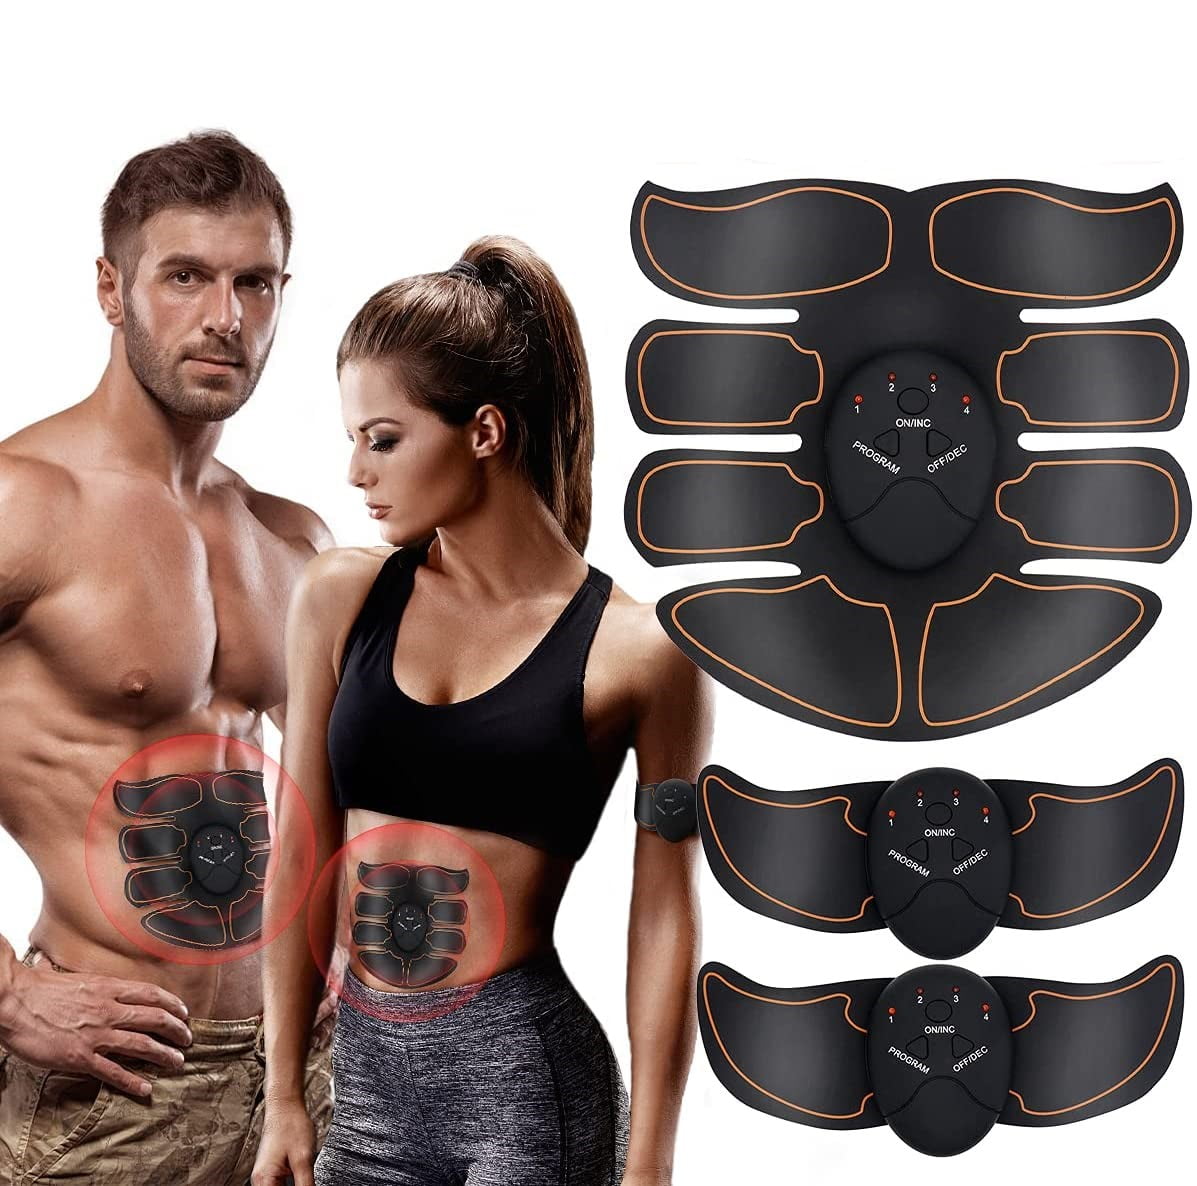 Abs Stimulator for Men and Women- EMS Muscle Stimulator